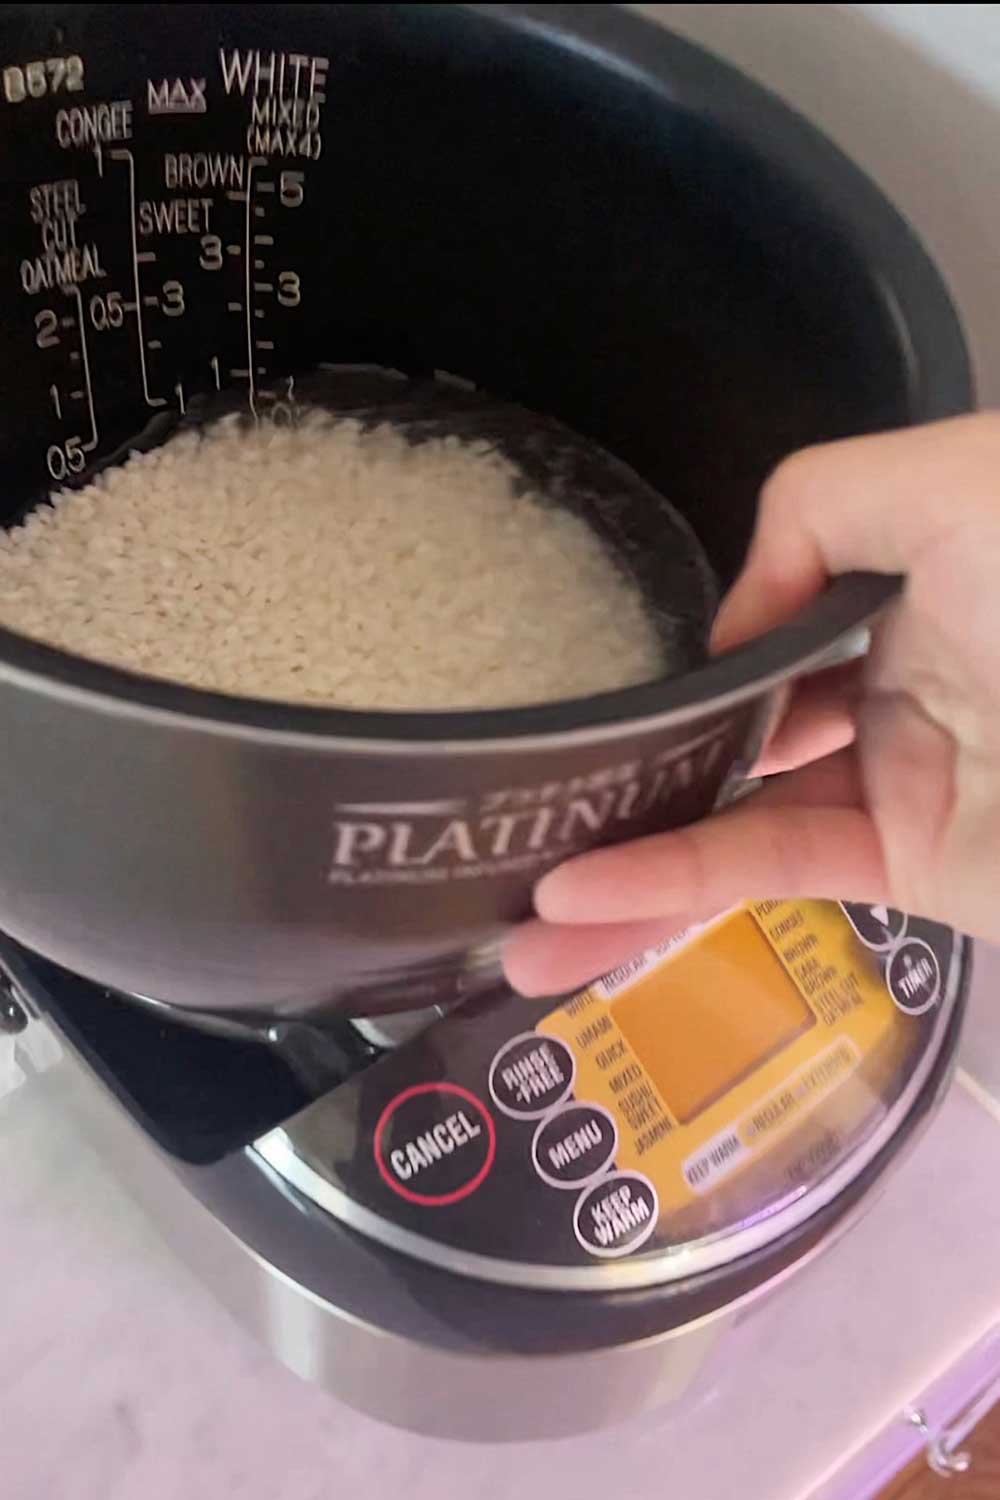 Recipe For Sticky Rice In Rice Cooker - Yelo HTX